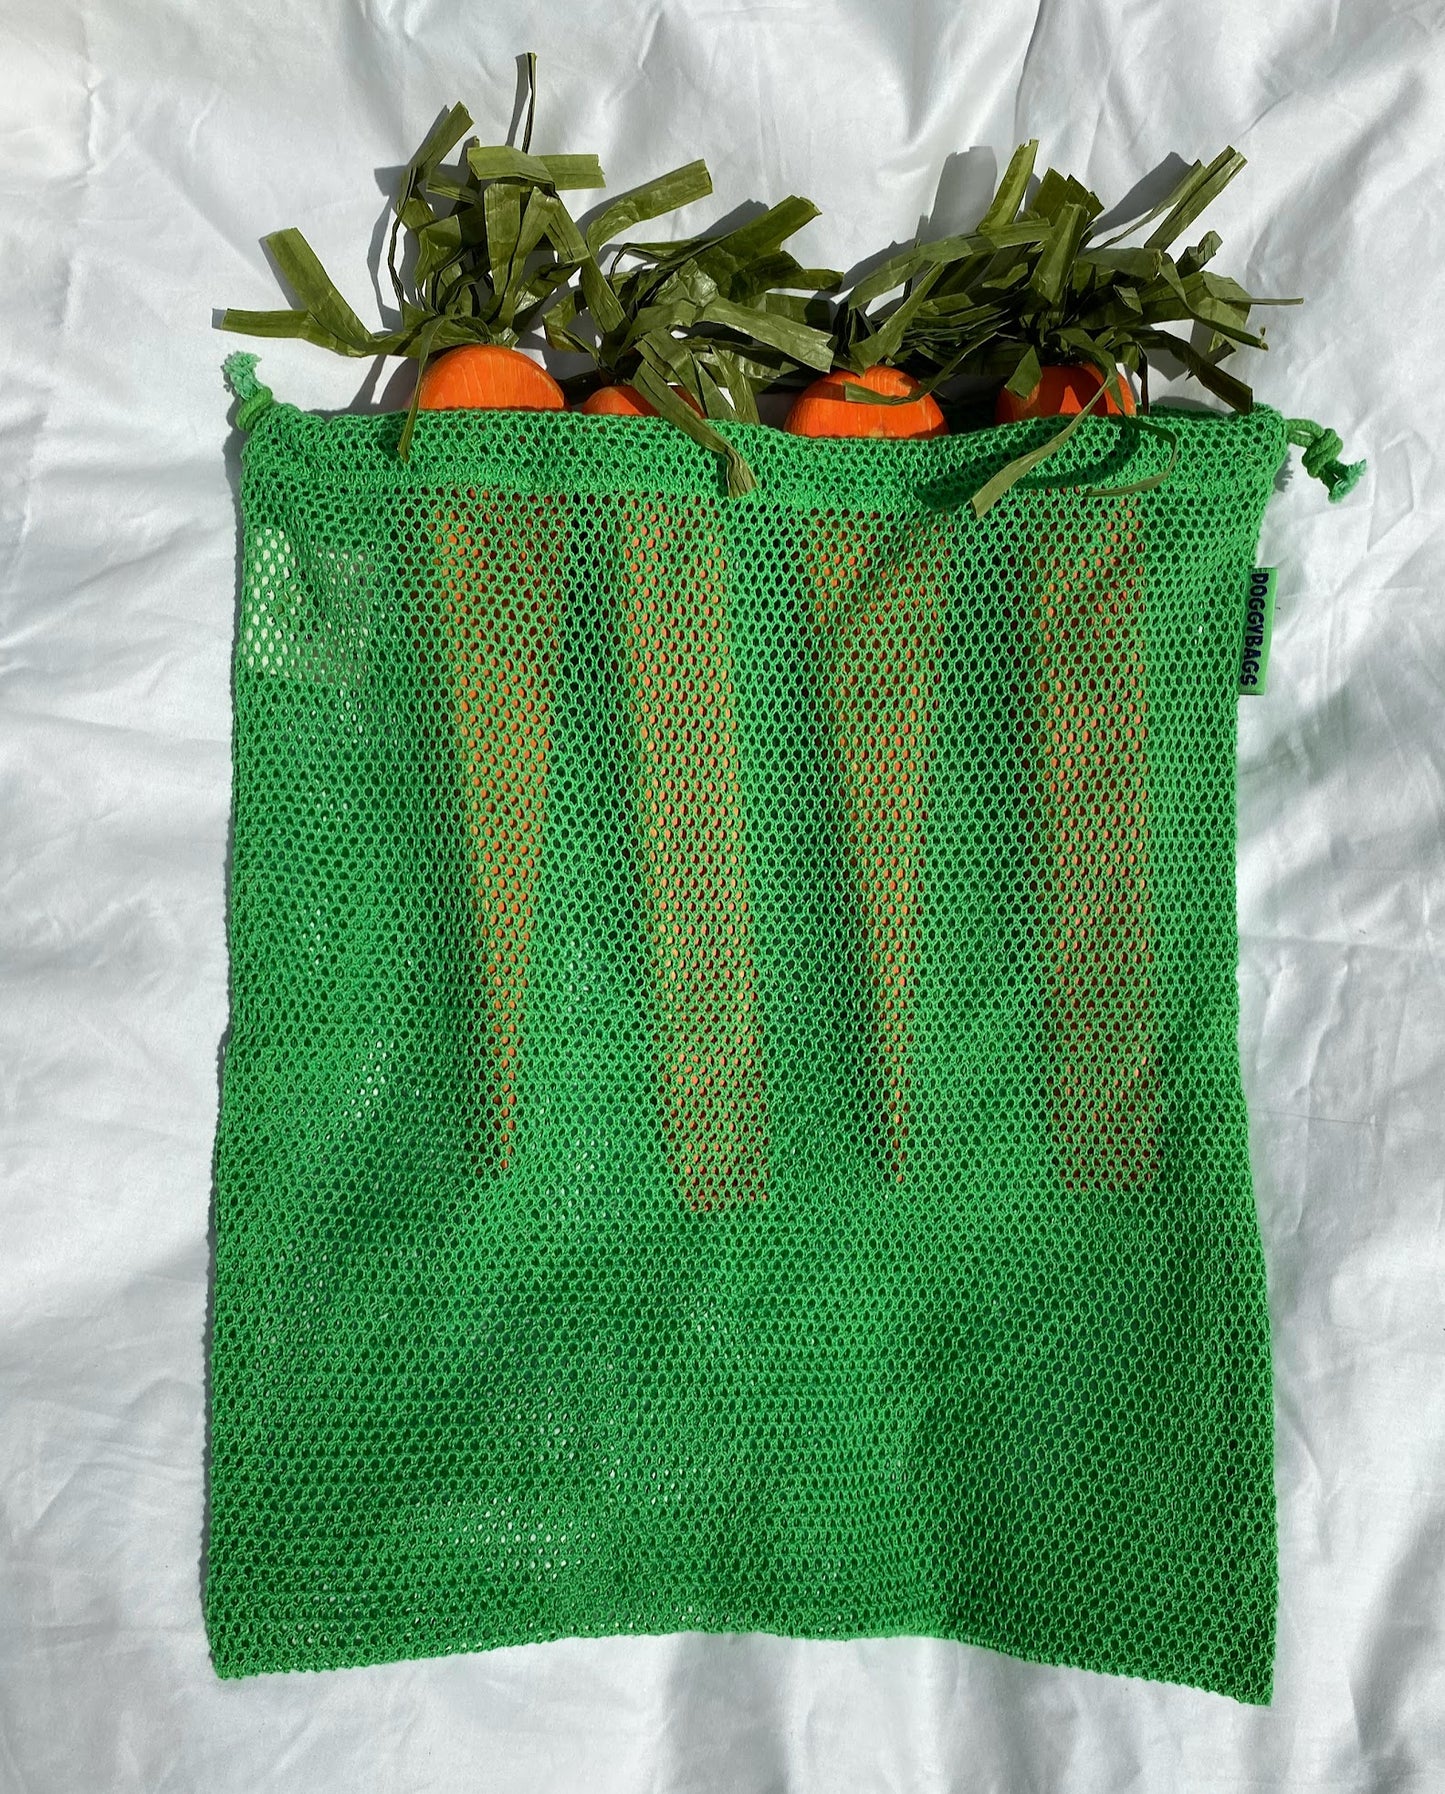 Produce Bags 3-Pack